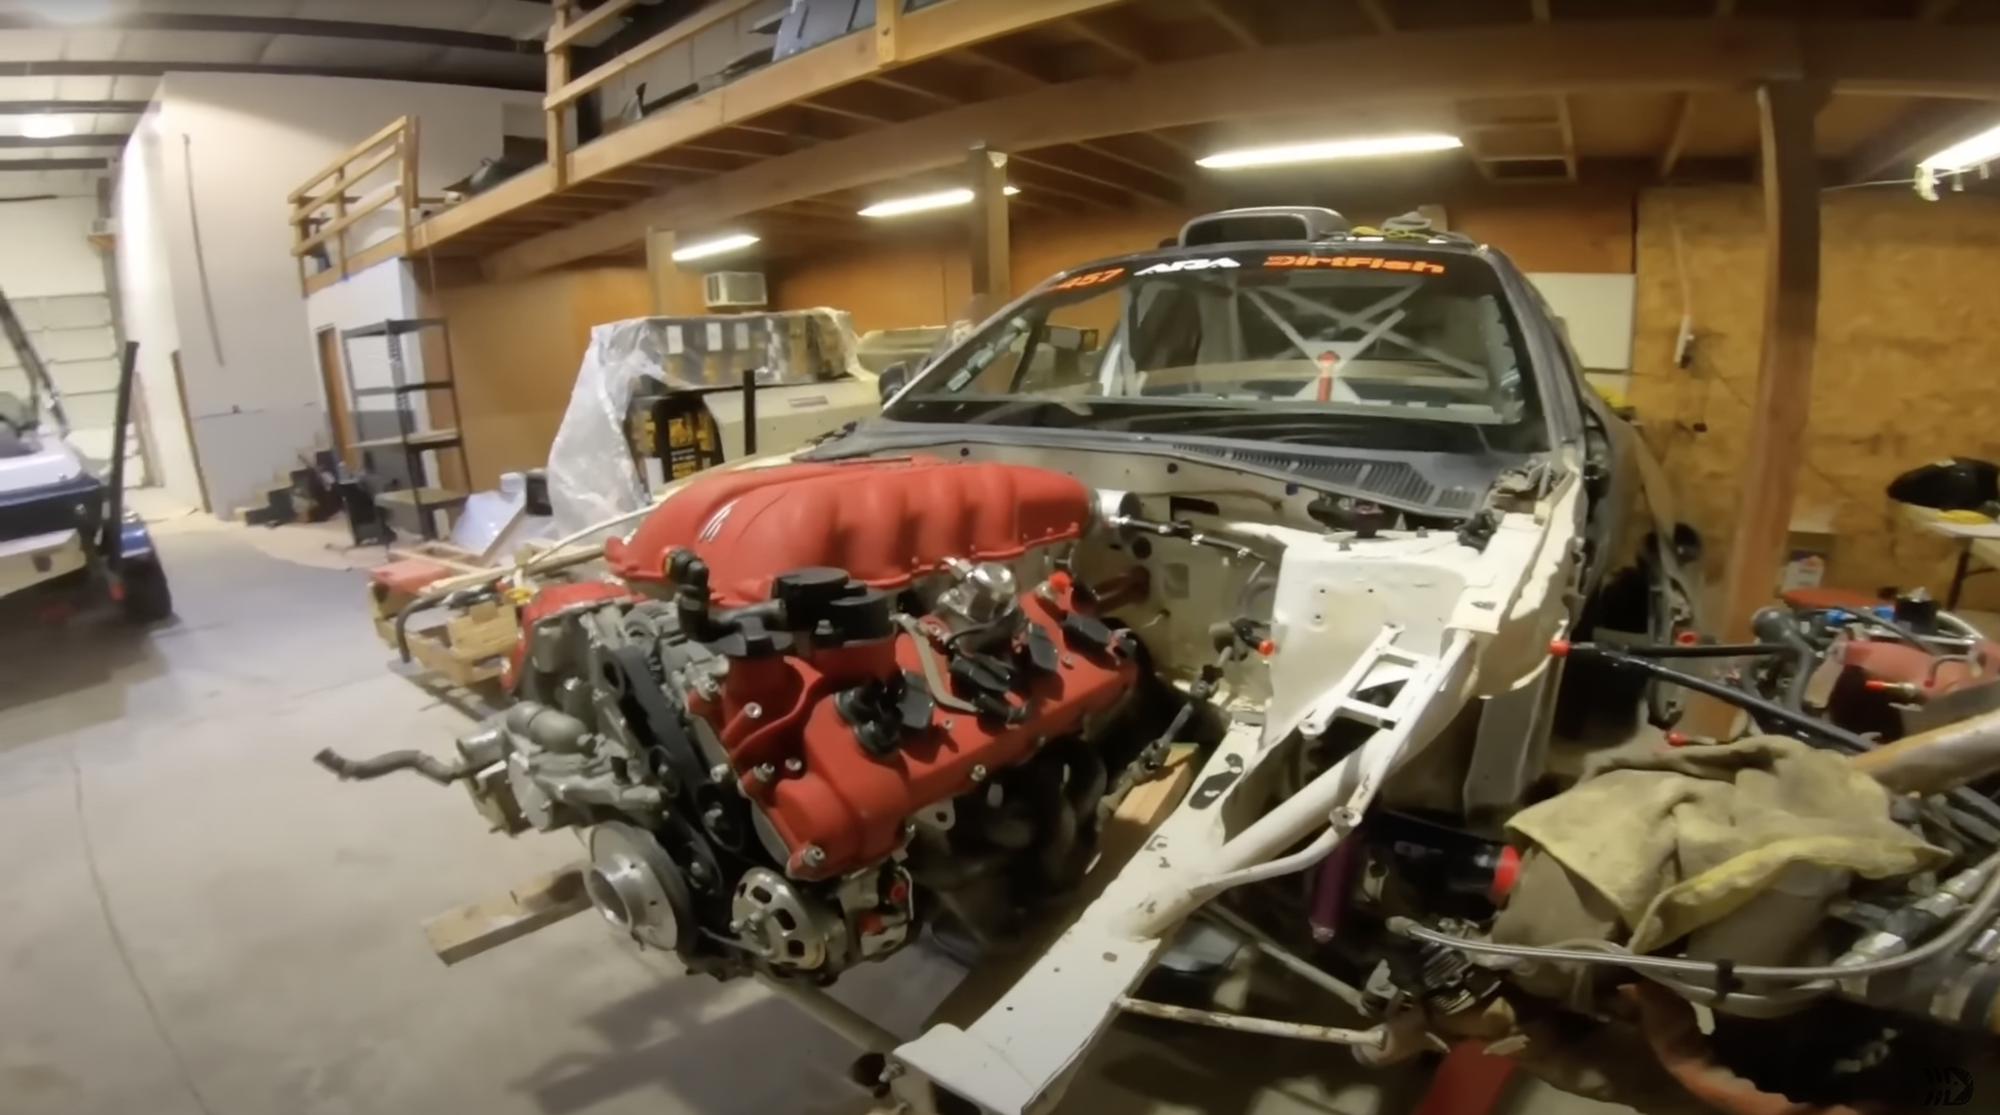 swapping-a-ferrari-v8-into-your-subaru-rally-car-is-one-way-to-fix-head-gaskets